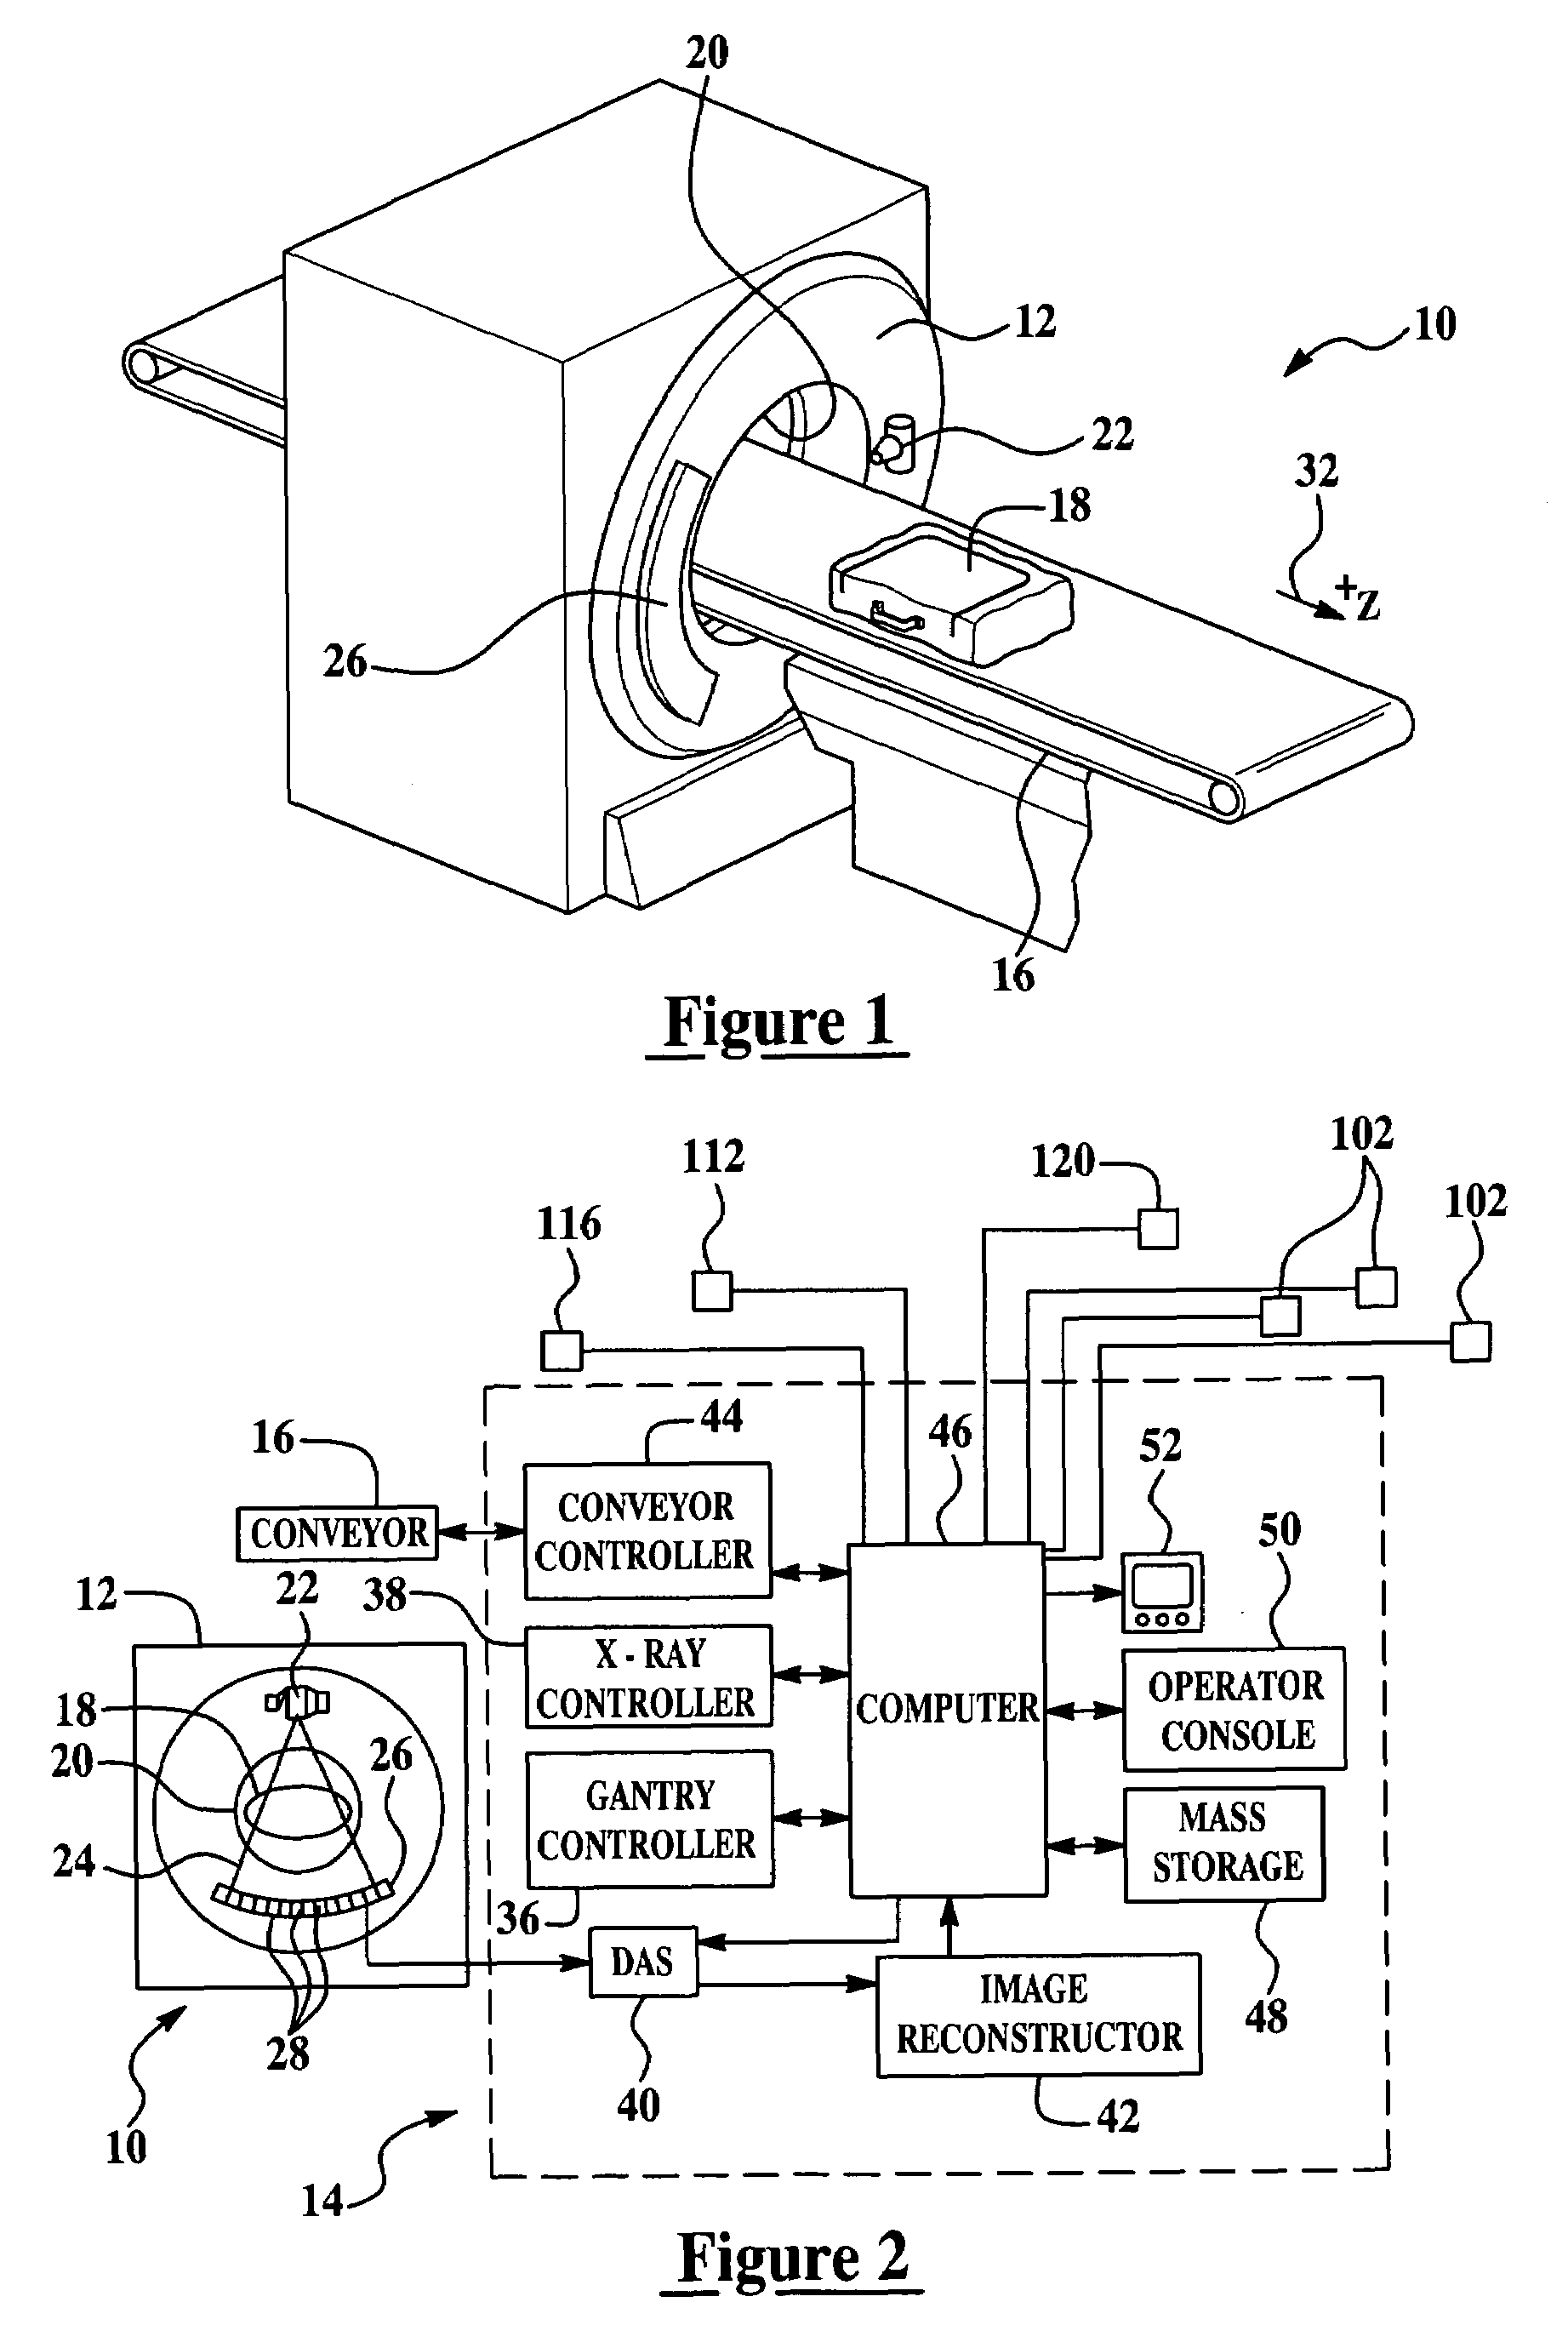 Apparatus and method for providing a shielding means for an X-ray detection system